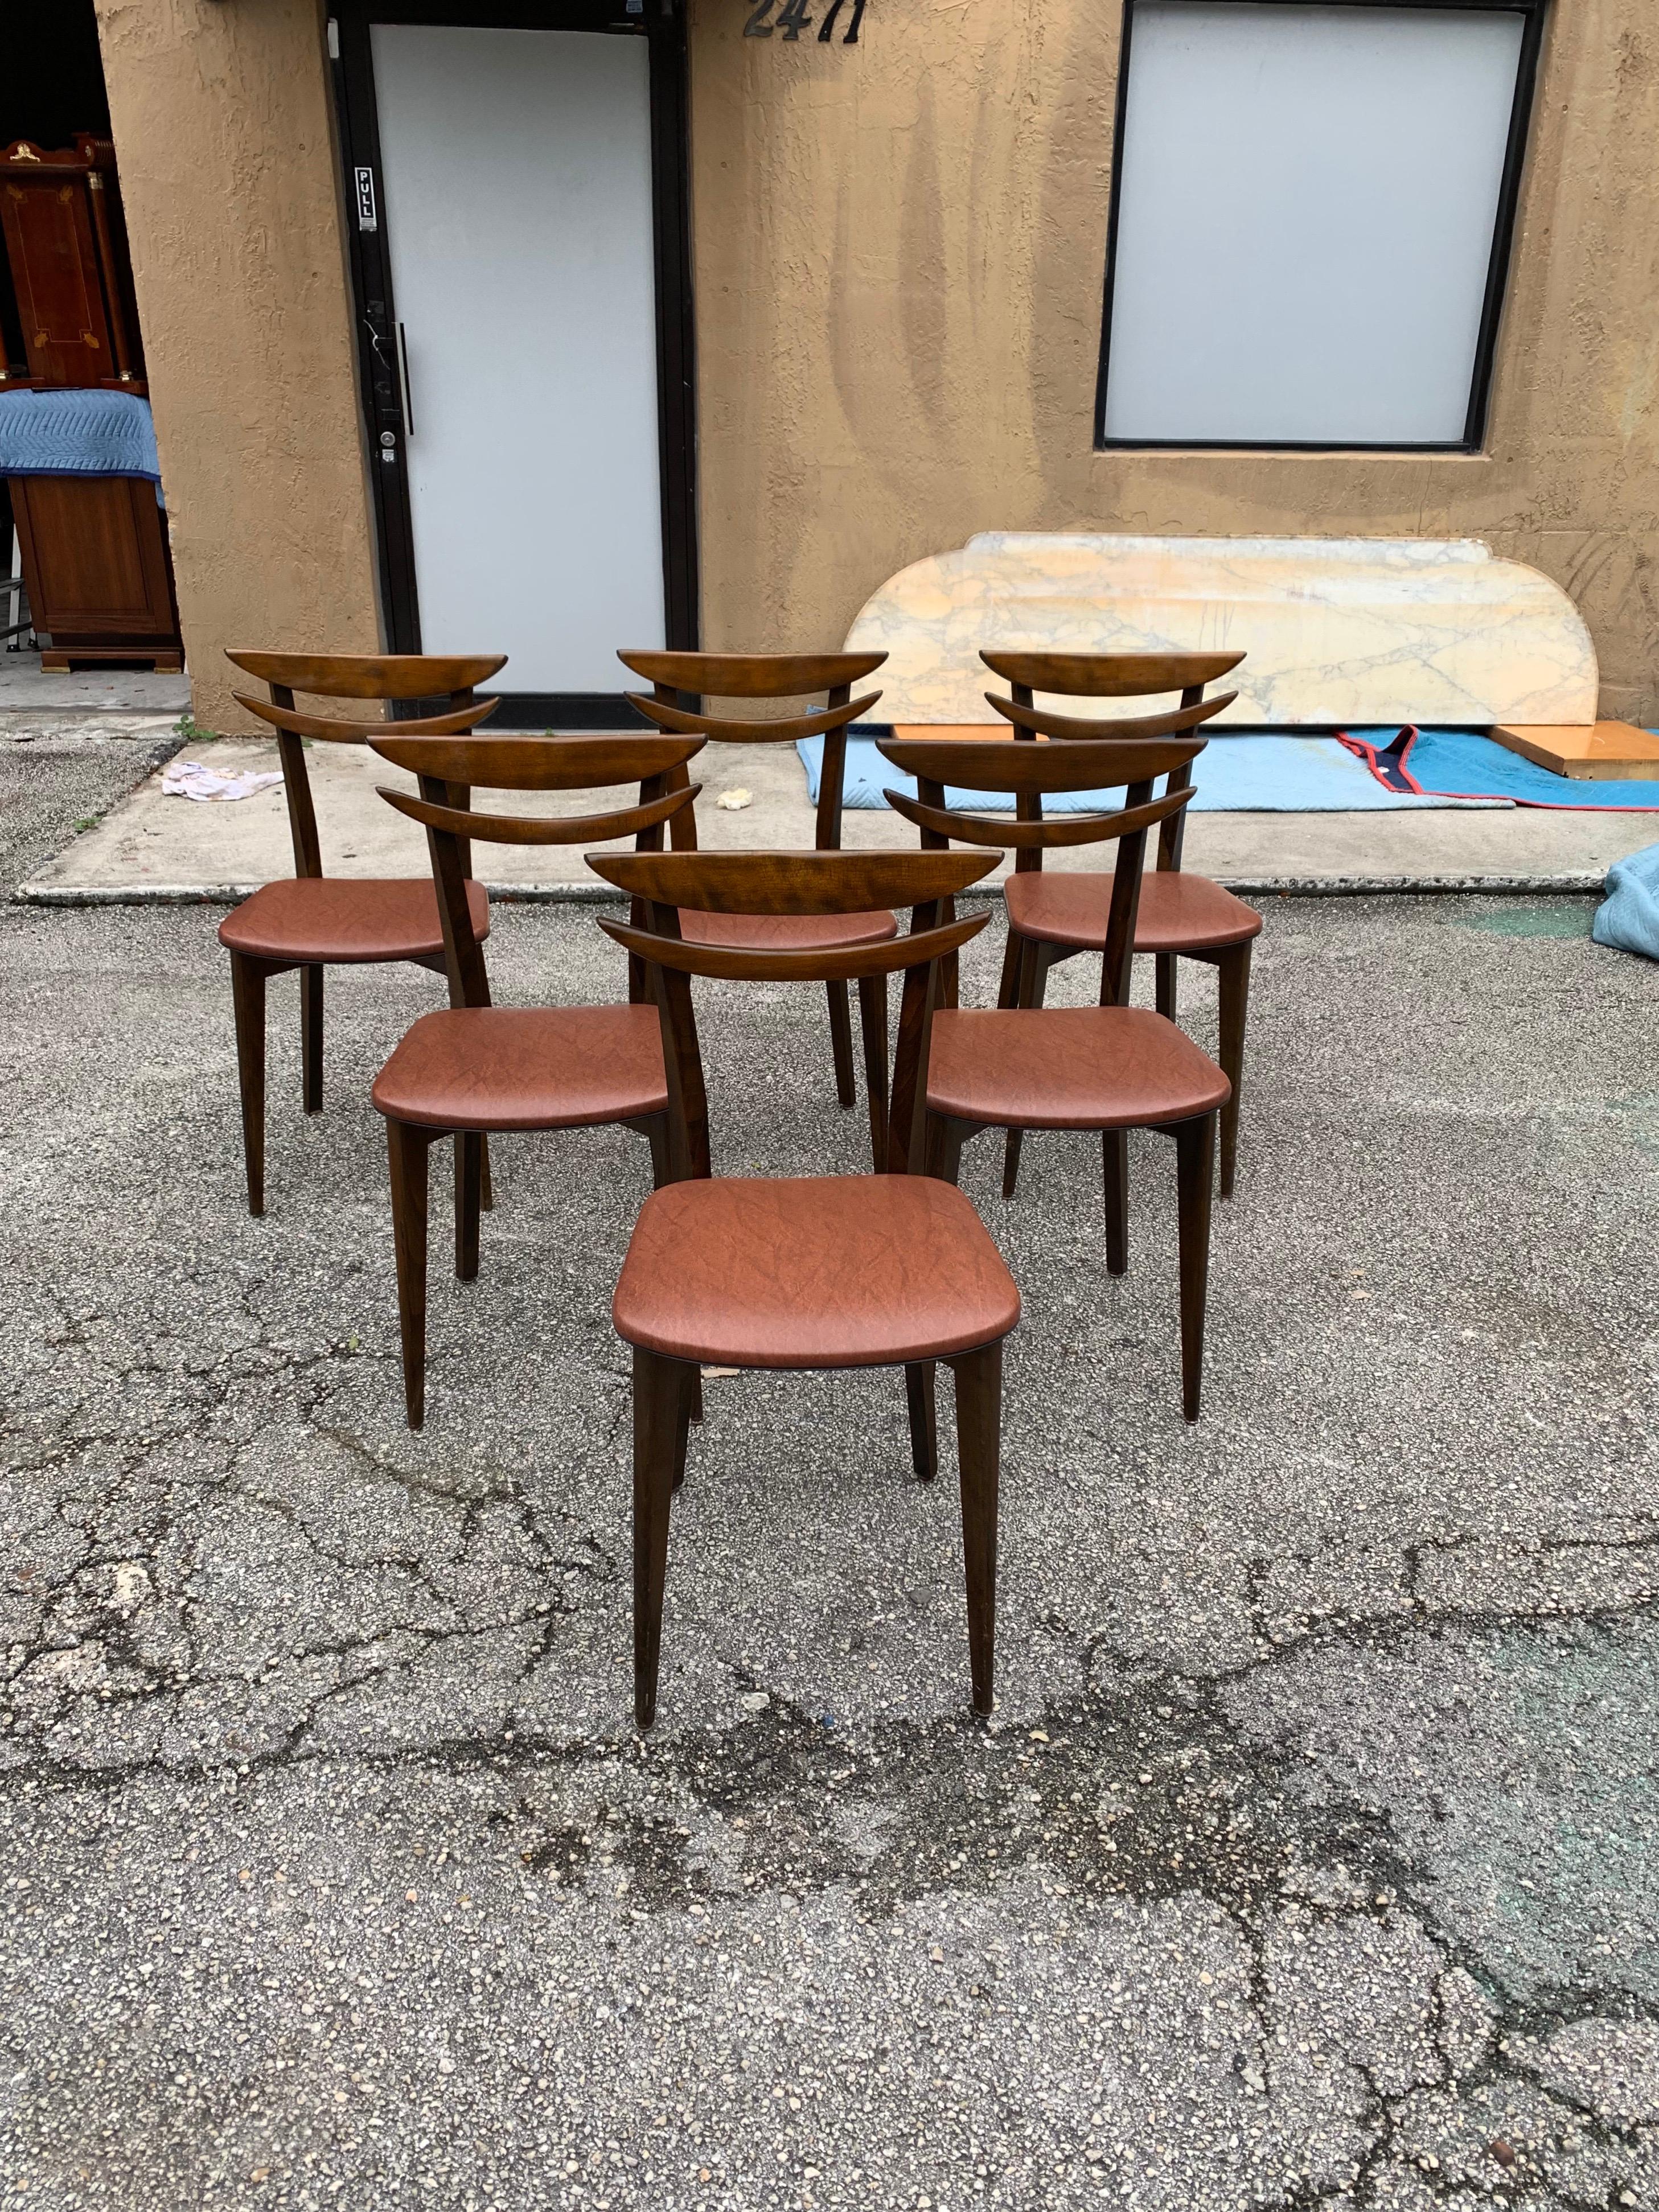 Classic set of six French Mid-Century Modern dining chairs solid mahogany, the chair frames are in excellent condition. The Reupholstery is vinyl and in very condition for all 6 dining chairs, the dining chairs are beautiful, circa 1950s.